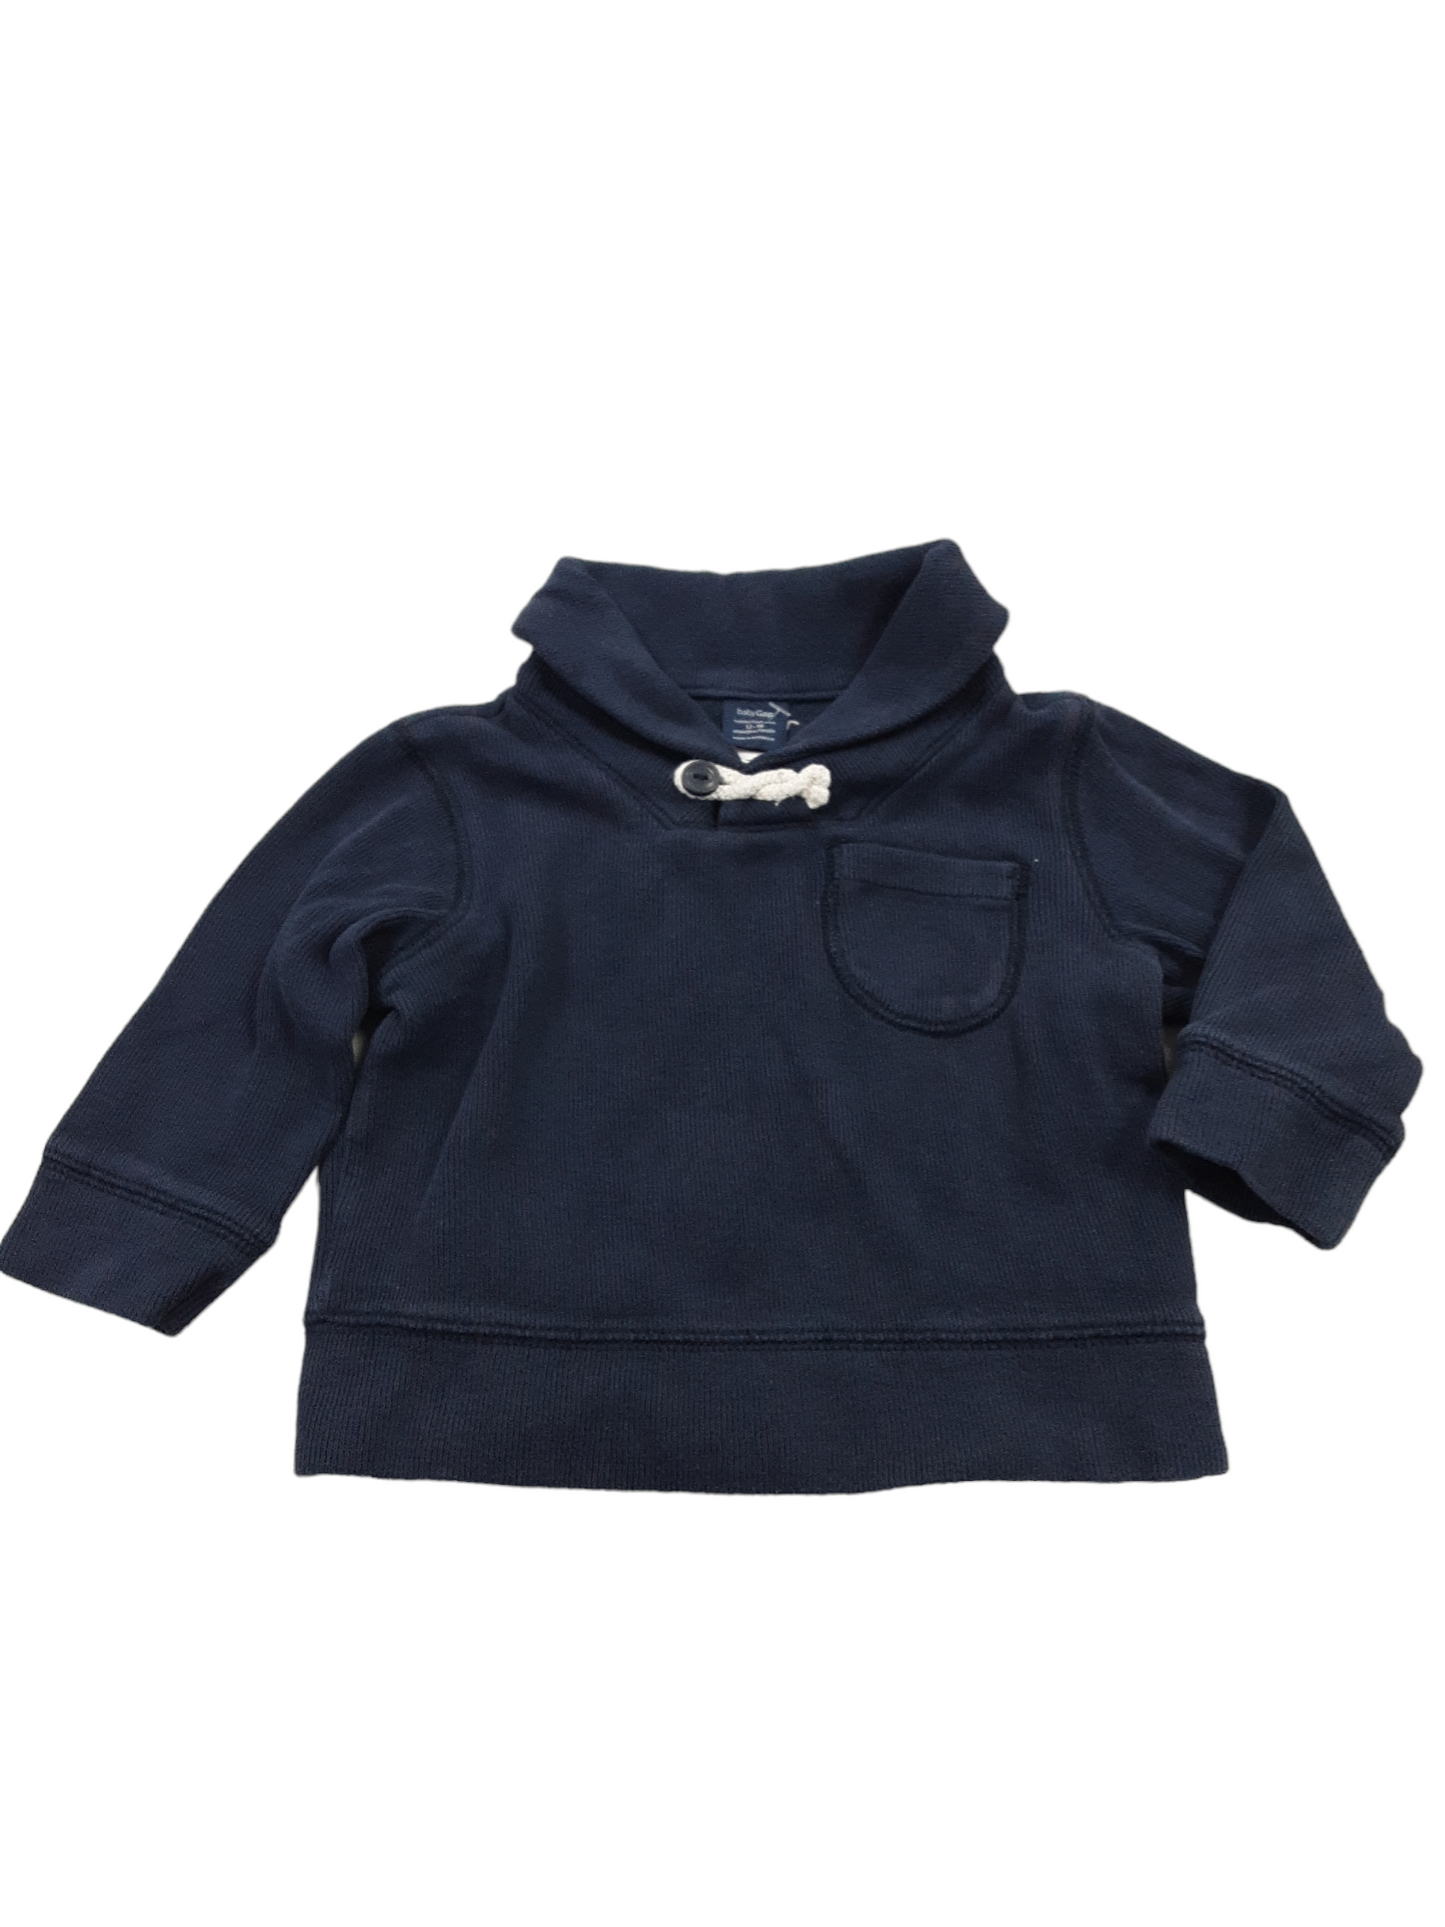 Navy fisherman top size 12-18months